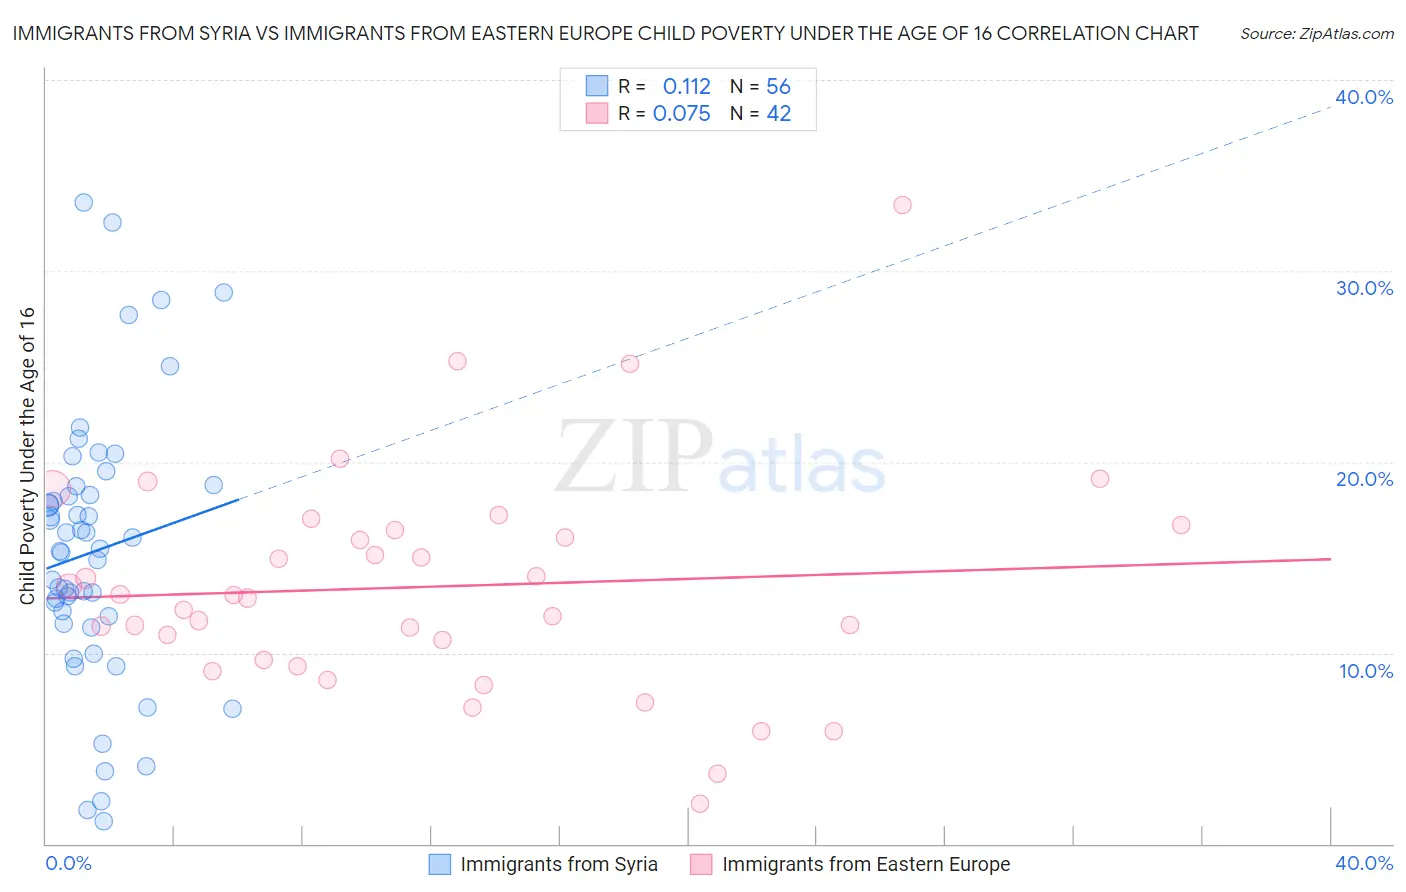 Immigrants from Syria vs Immigrants from Eastern Europe Child Poverty Under the Age of 16